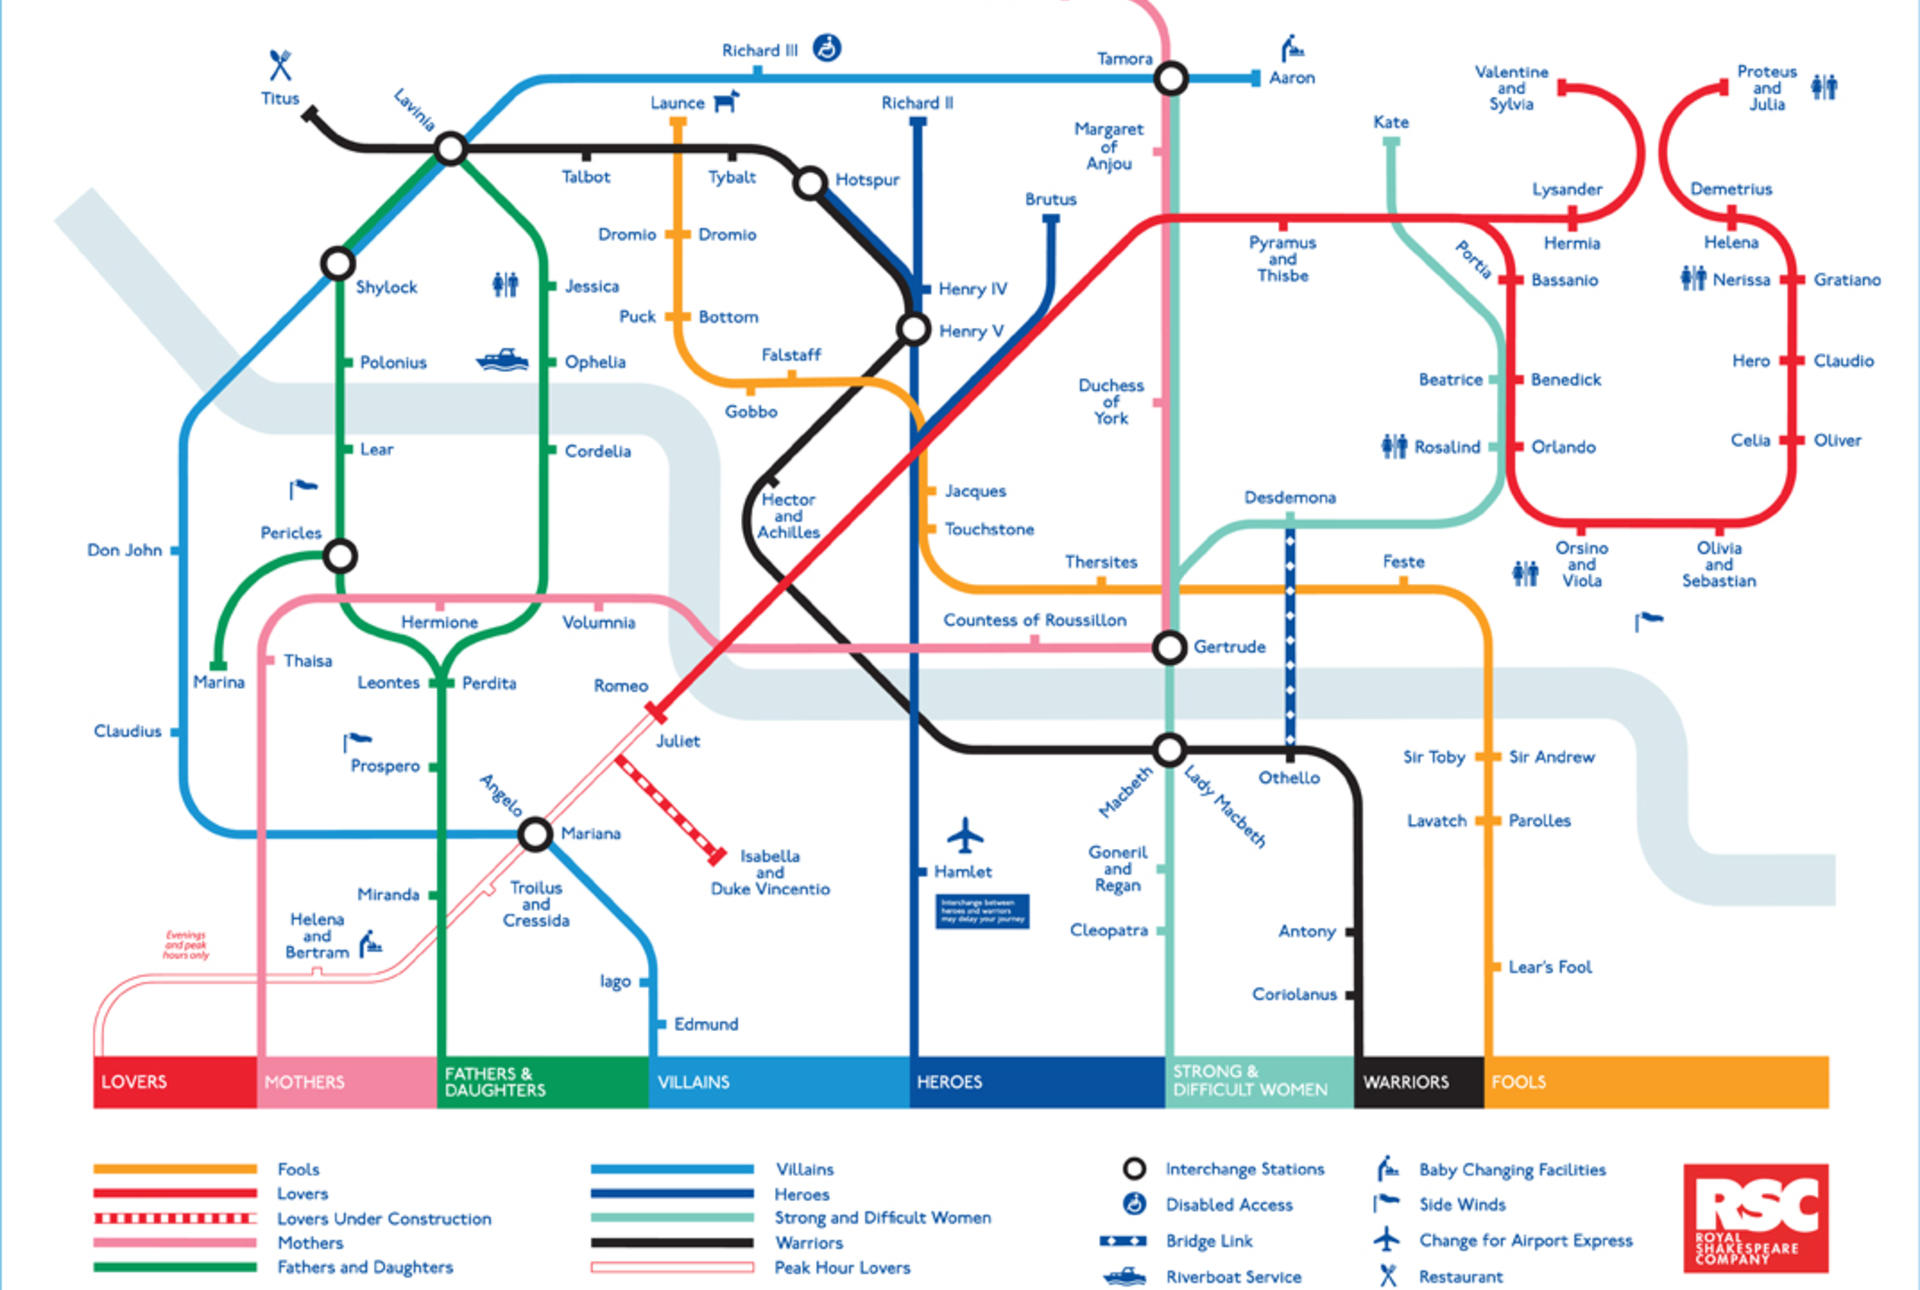 A public transit style map with Shakespeare references instead of stops.